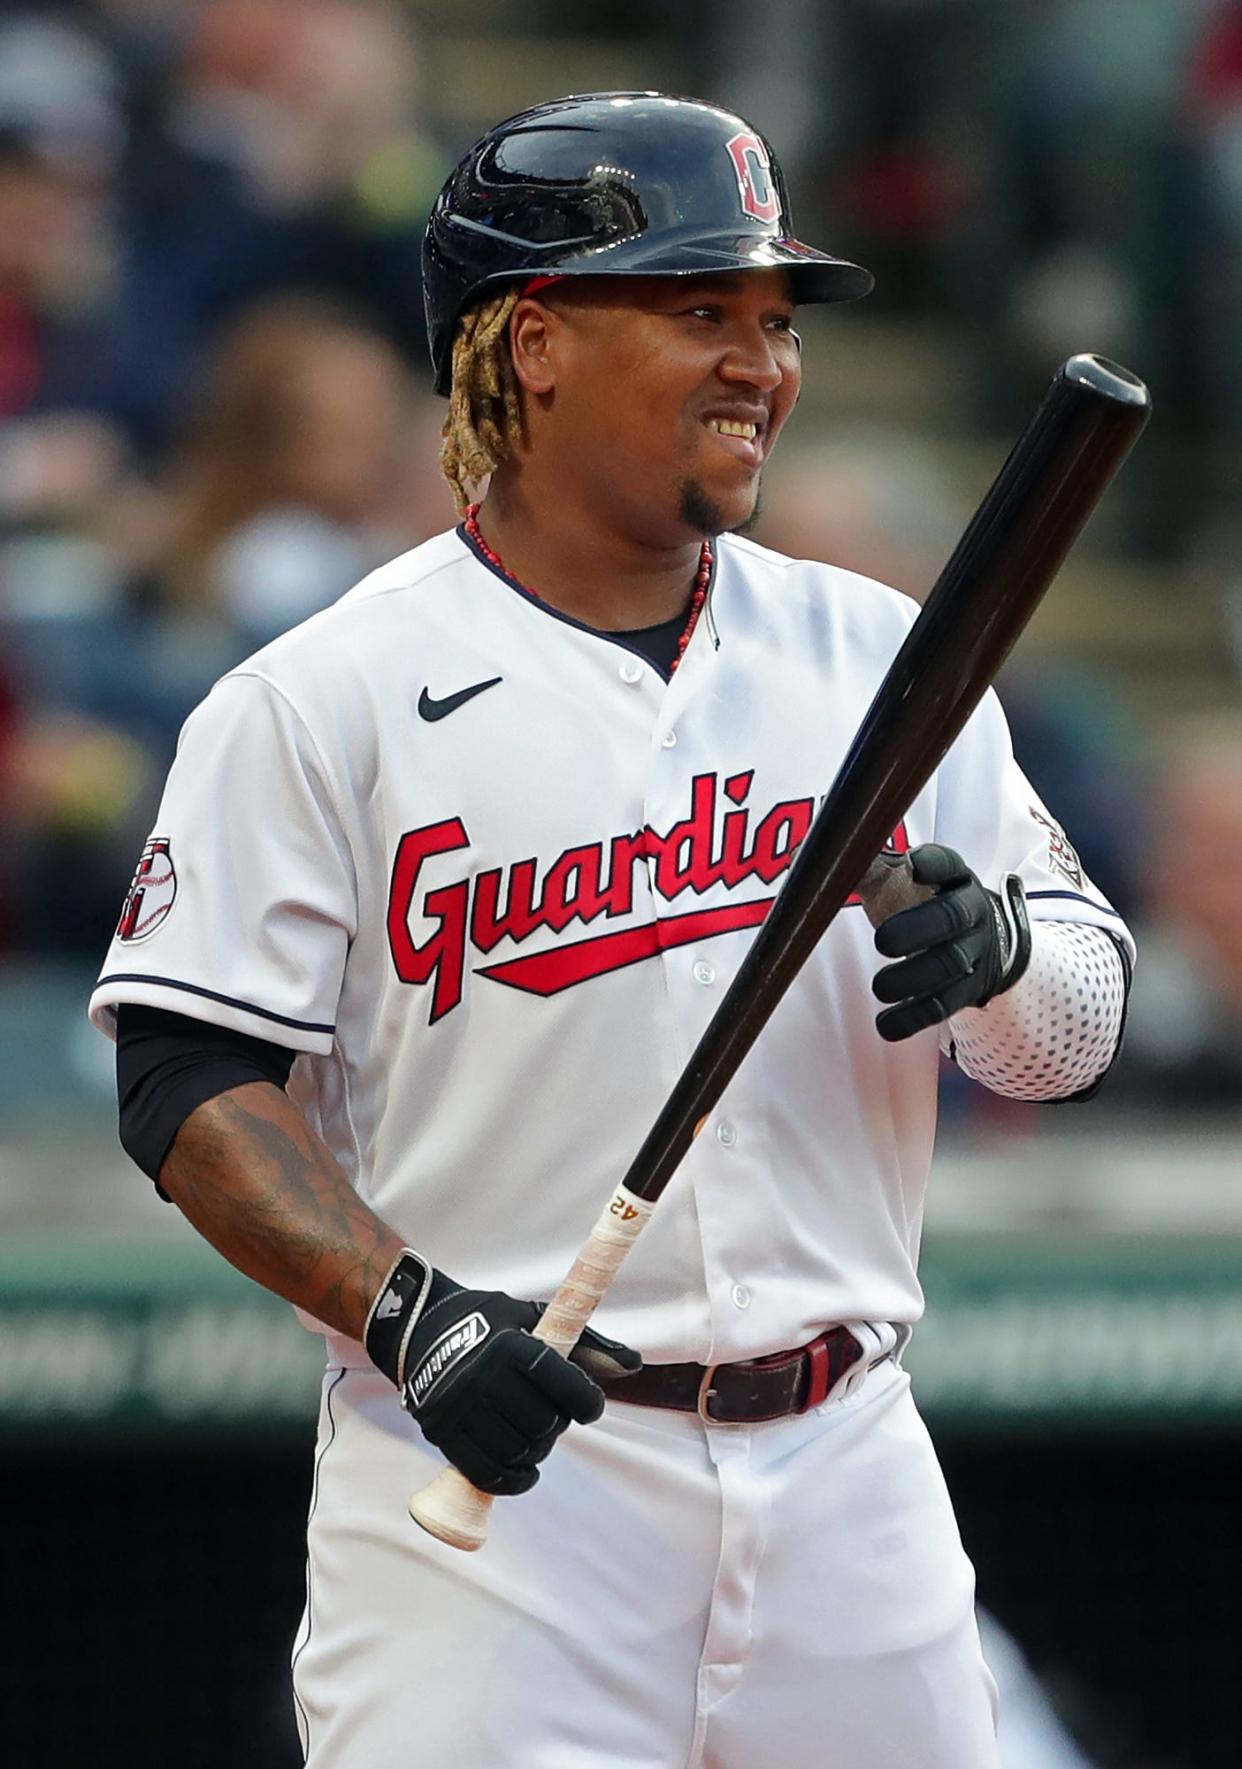 Cleveland Guardians third baseman Jose Ramirez (11) smiles as he steps into the batters box during the first inning of an MLB baseball game against the San Francisco Giants at Progressive Field in Cleveland on Friday.